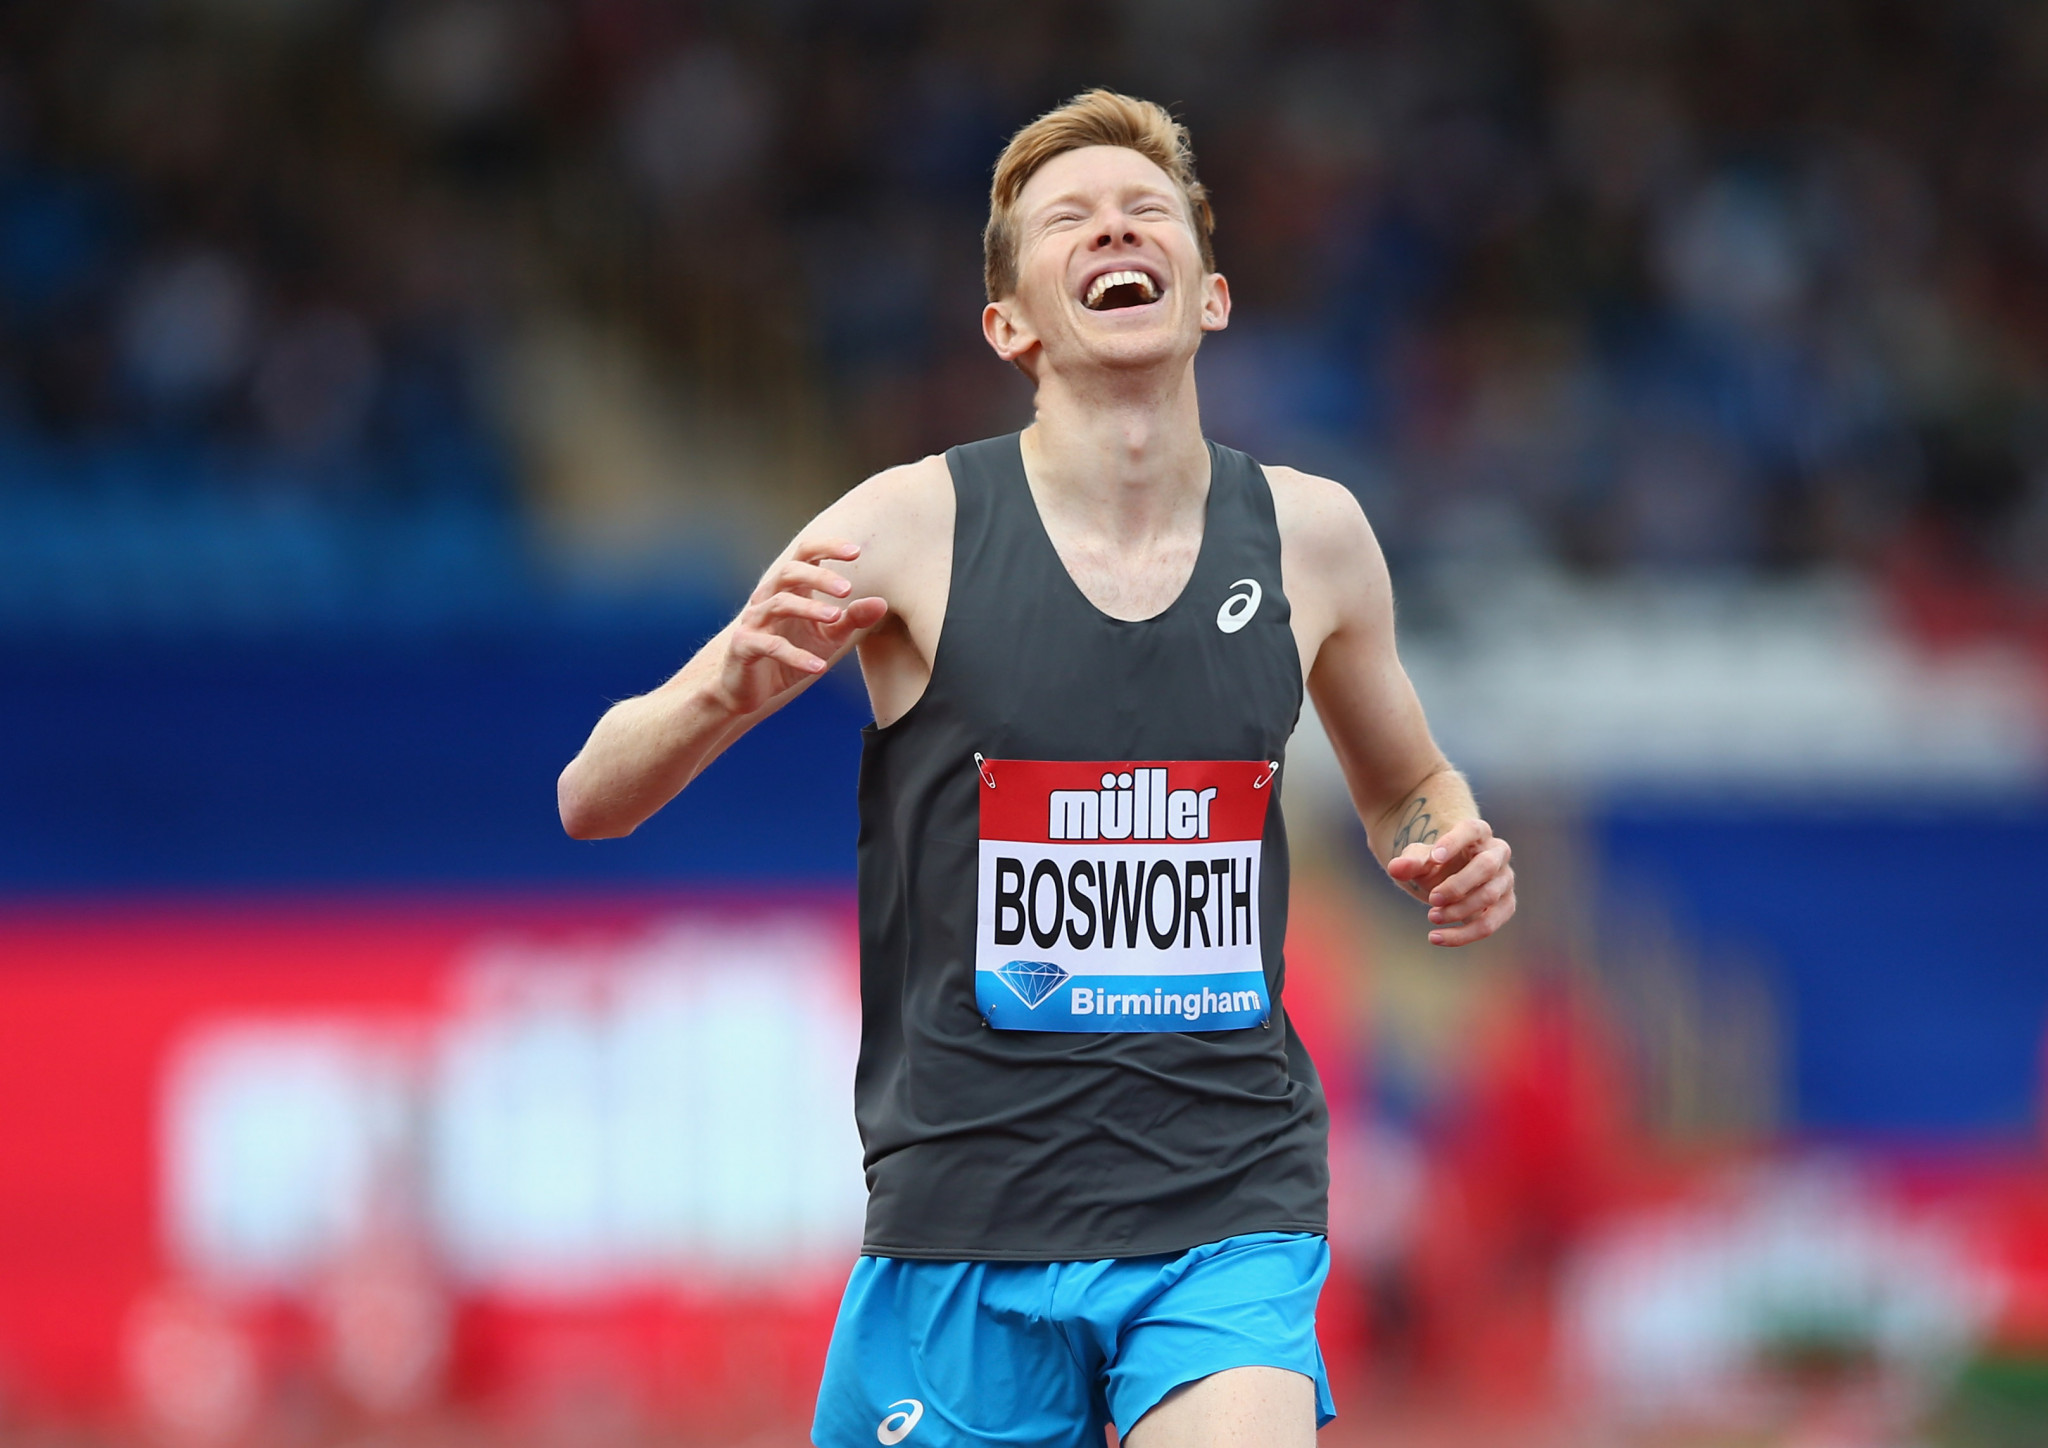 British rising star Bosworth believes race-walking must embrace relay and track events 